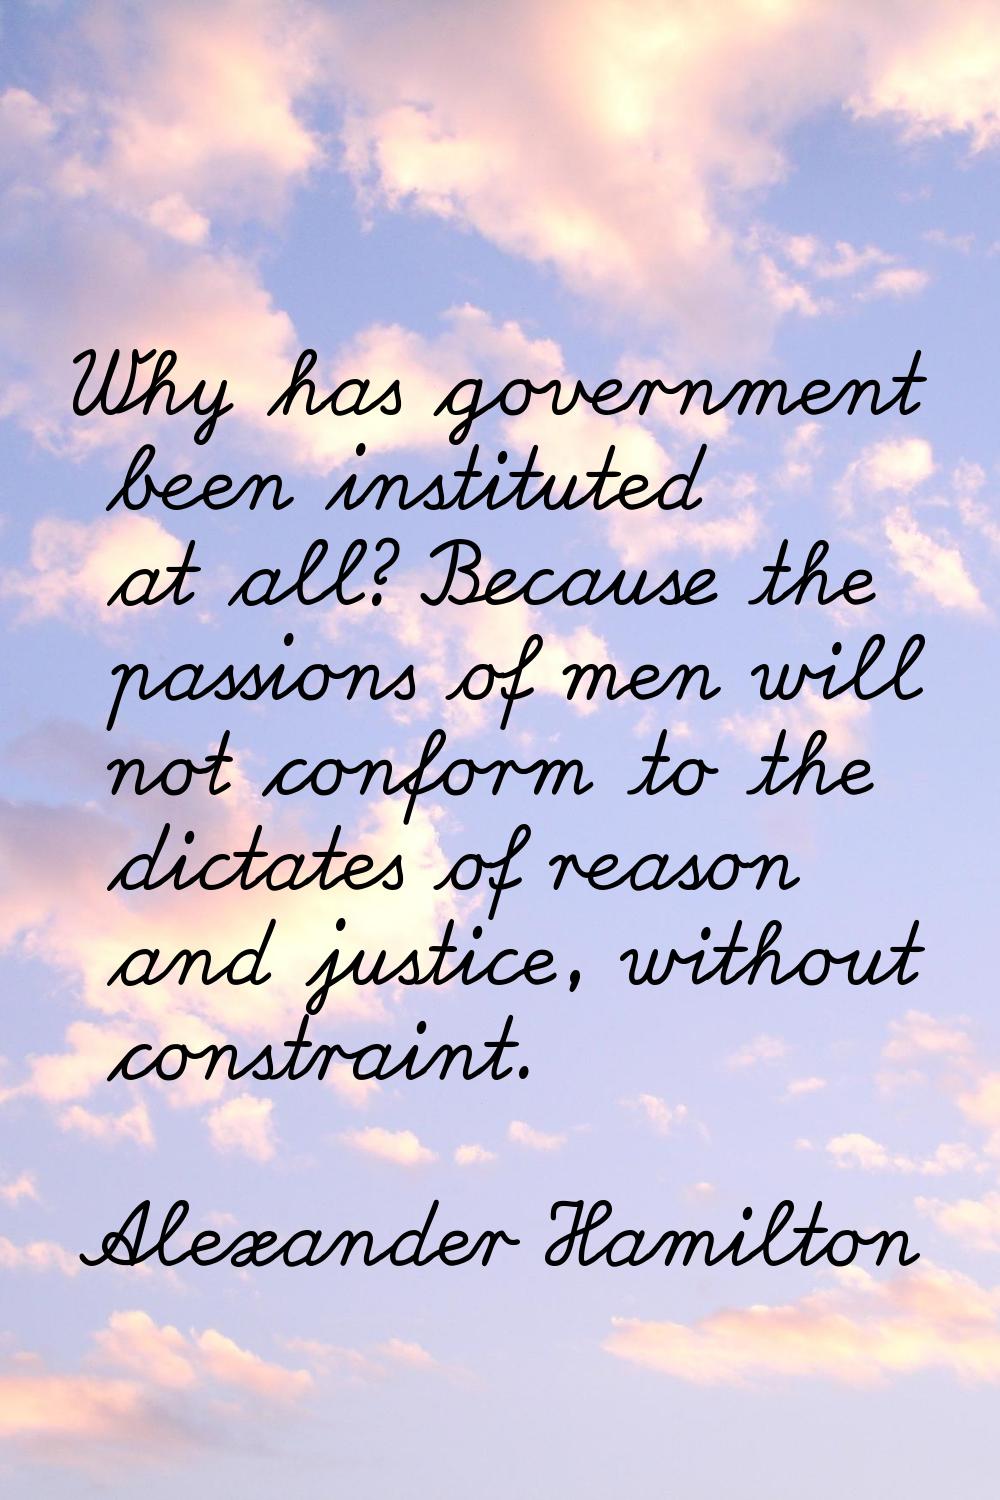 Why has government been instituted at all? Because the passions of men will not conform to the dict